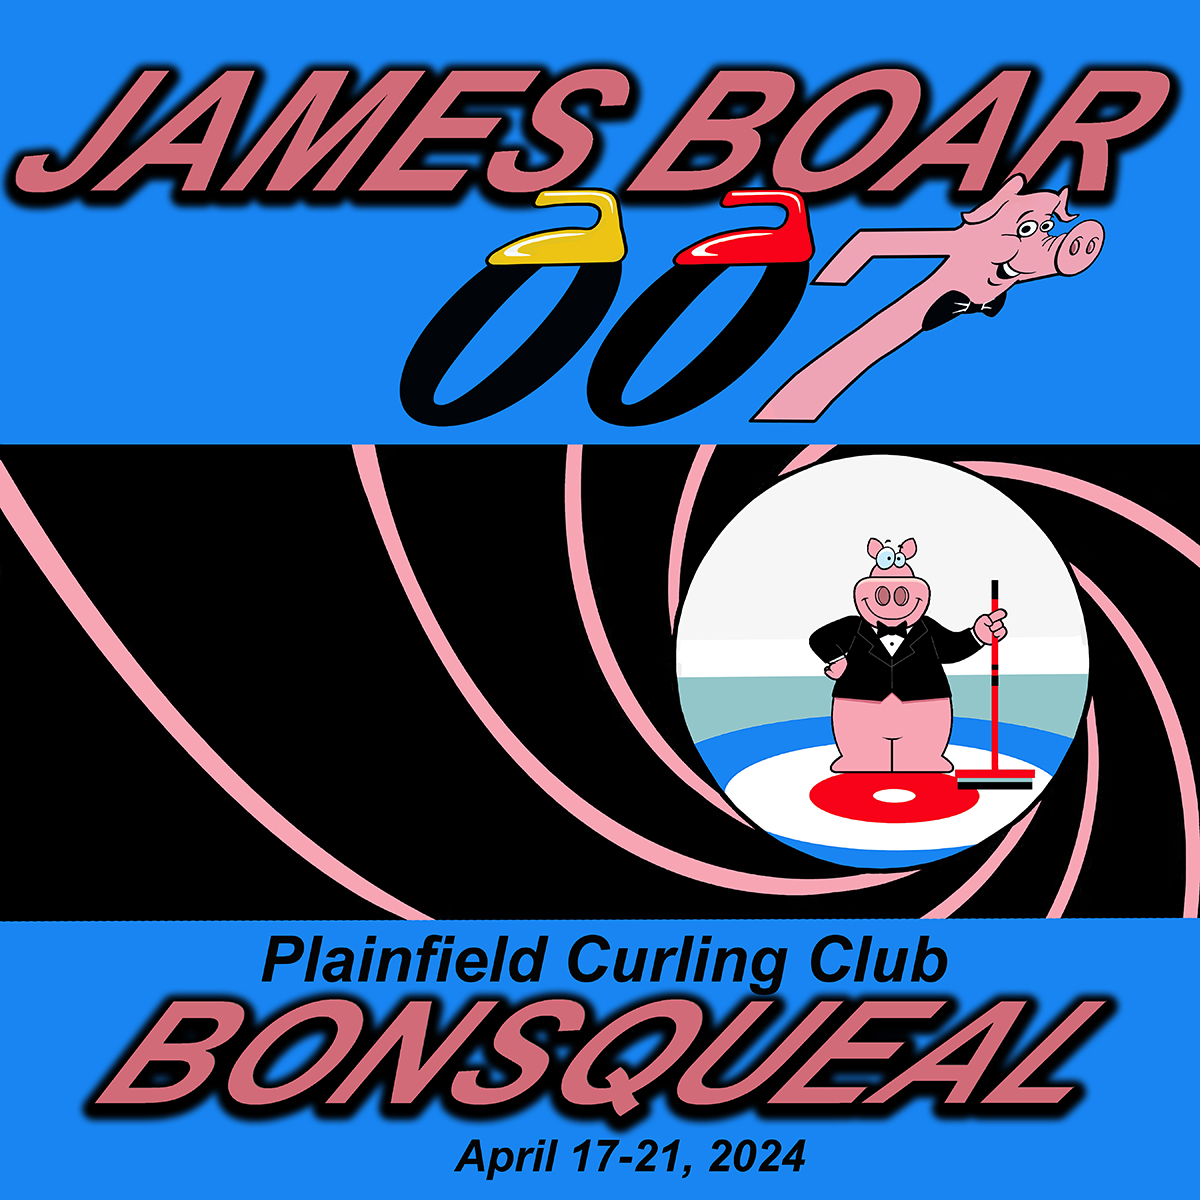 The James Boar 007 Bonsqueal